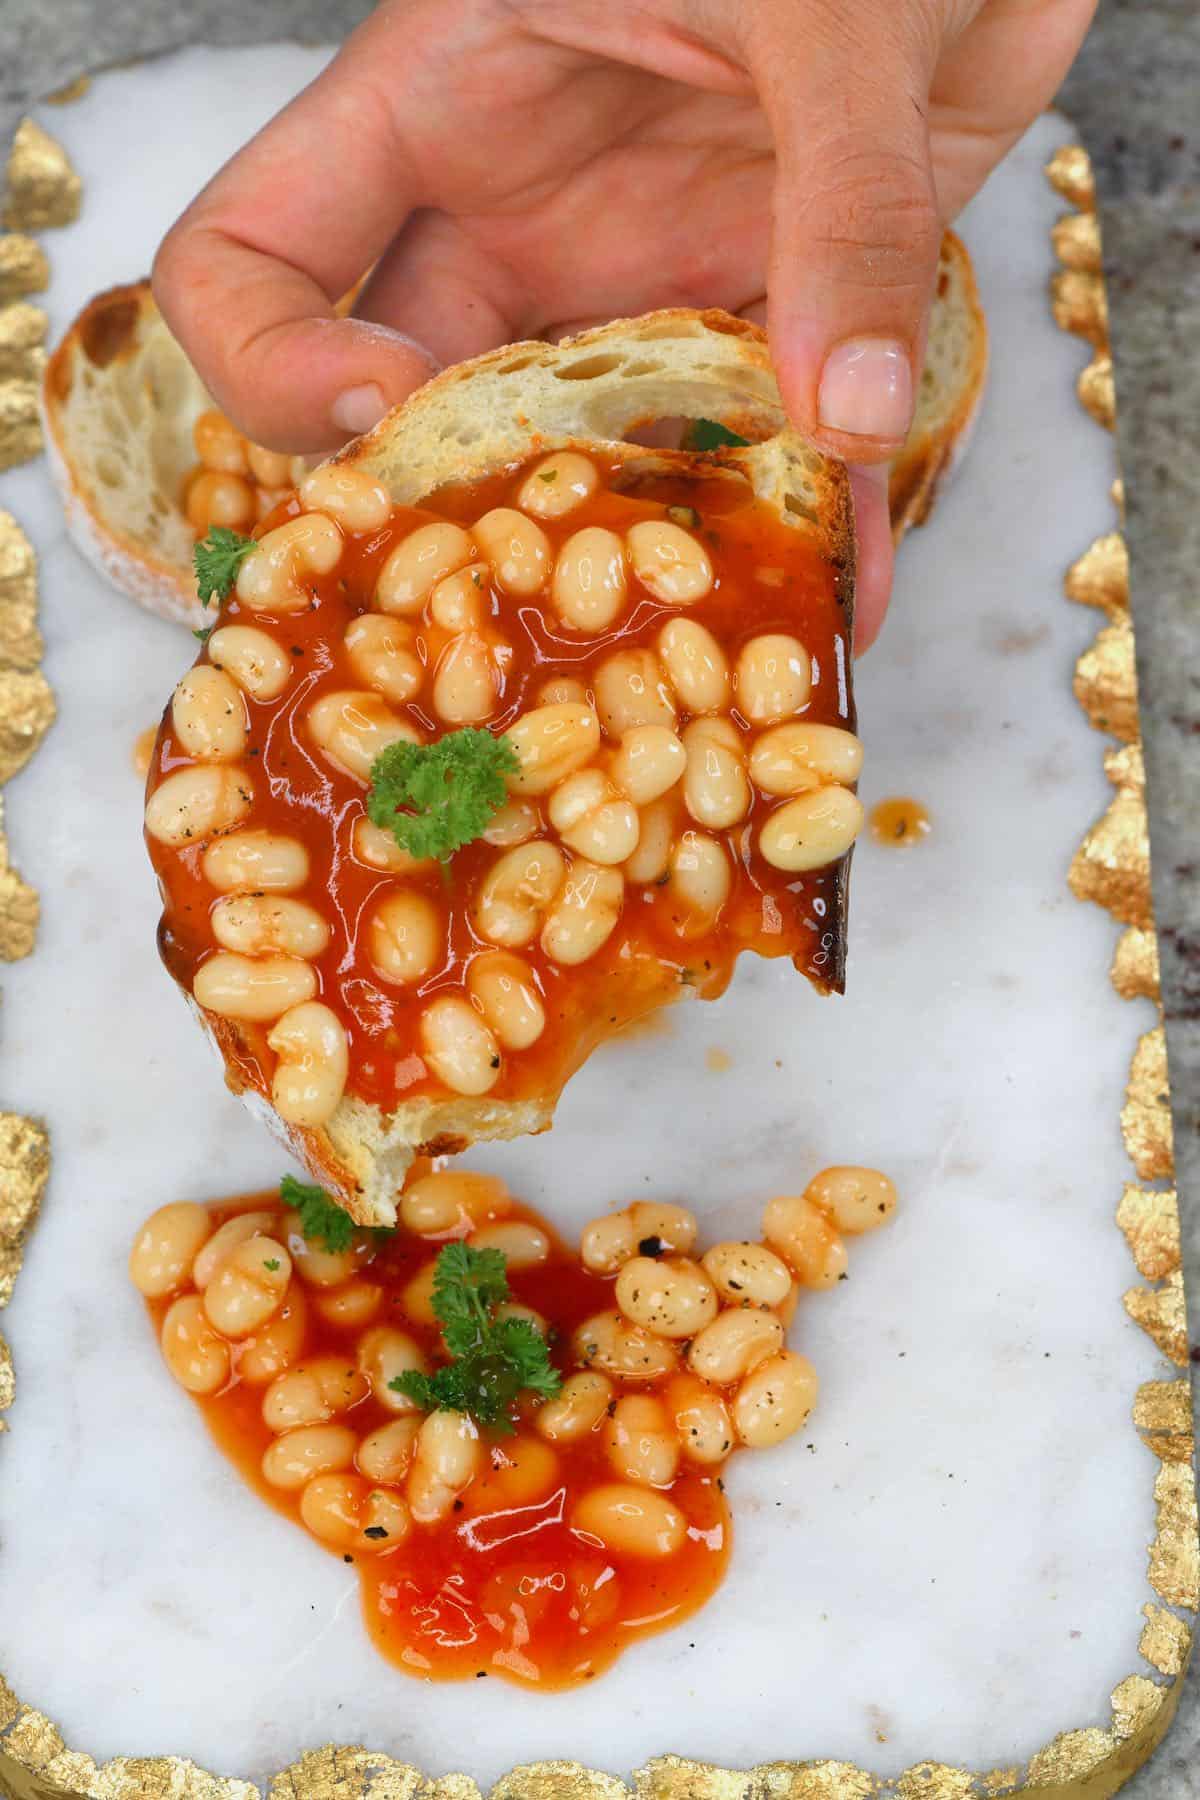 Toast with baked beans